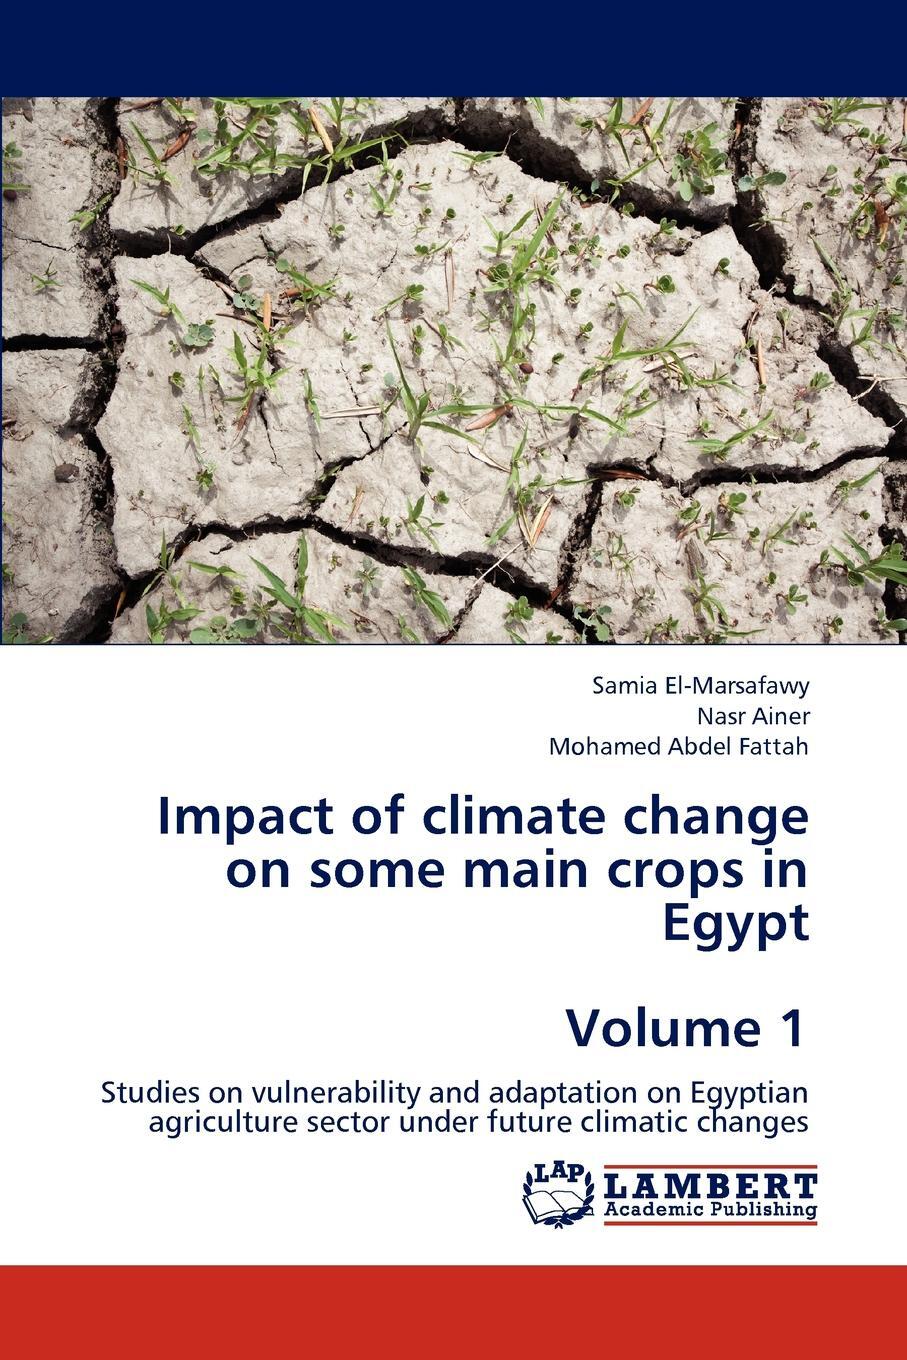 фото Impact of climate change on some main crops in Egypt Volume 1